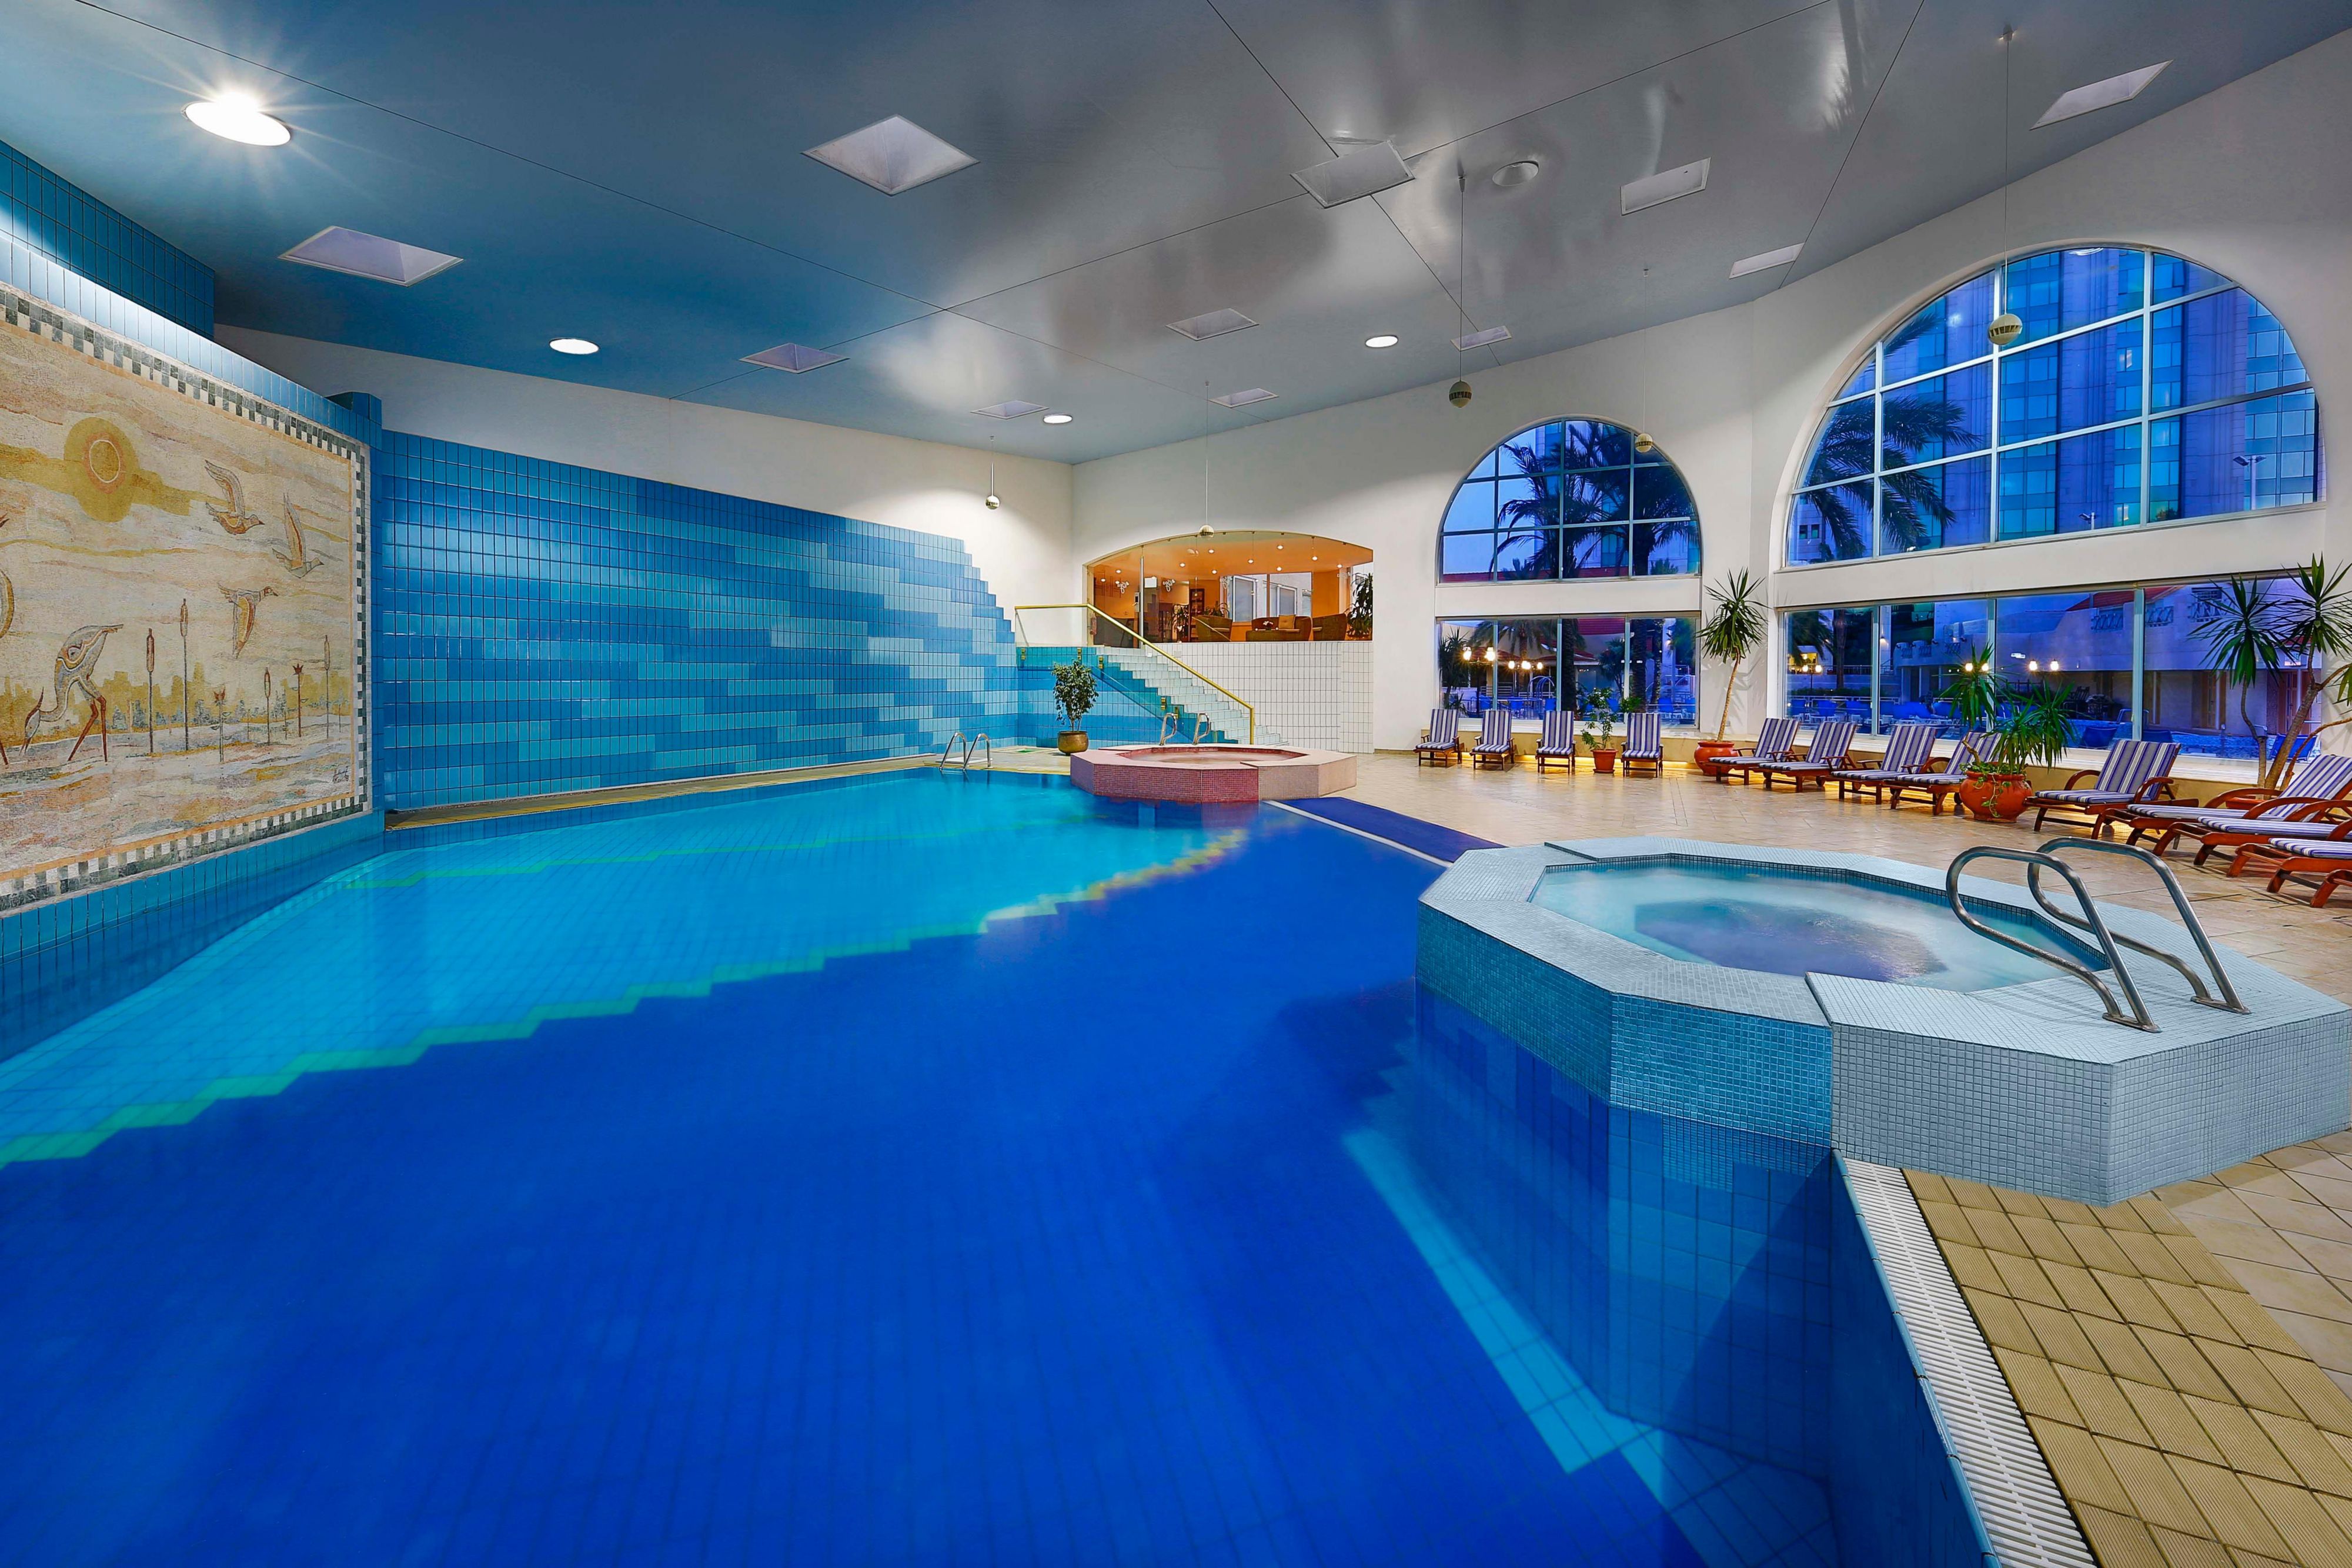 Take a leisurely swim in our all year heated indoor pool